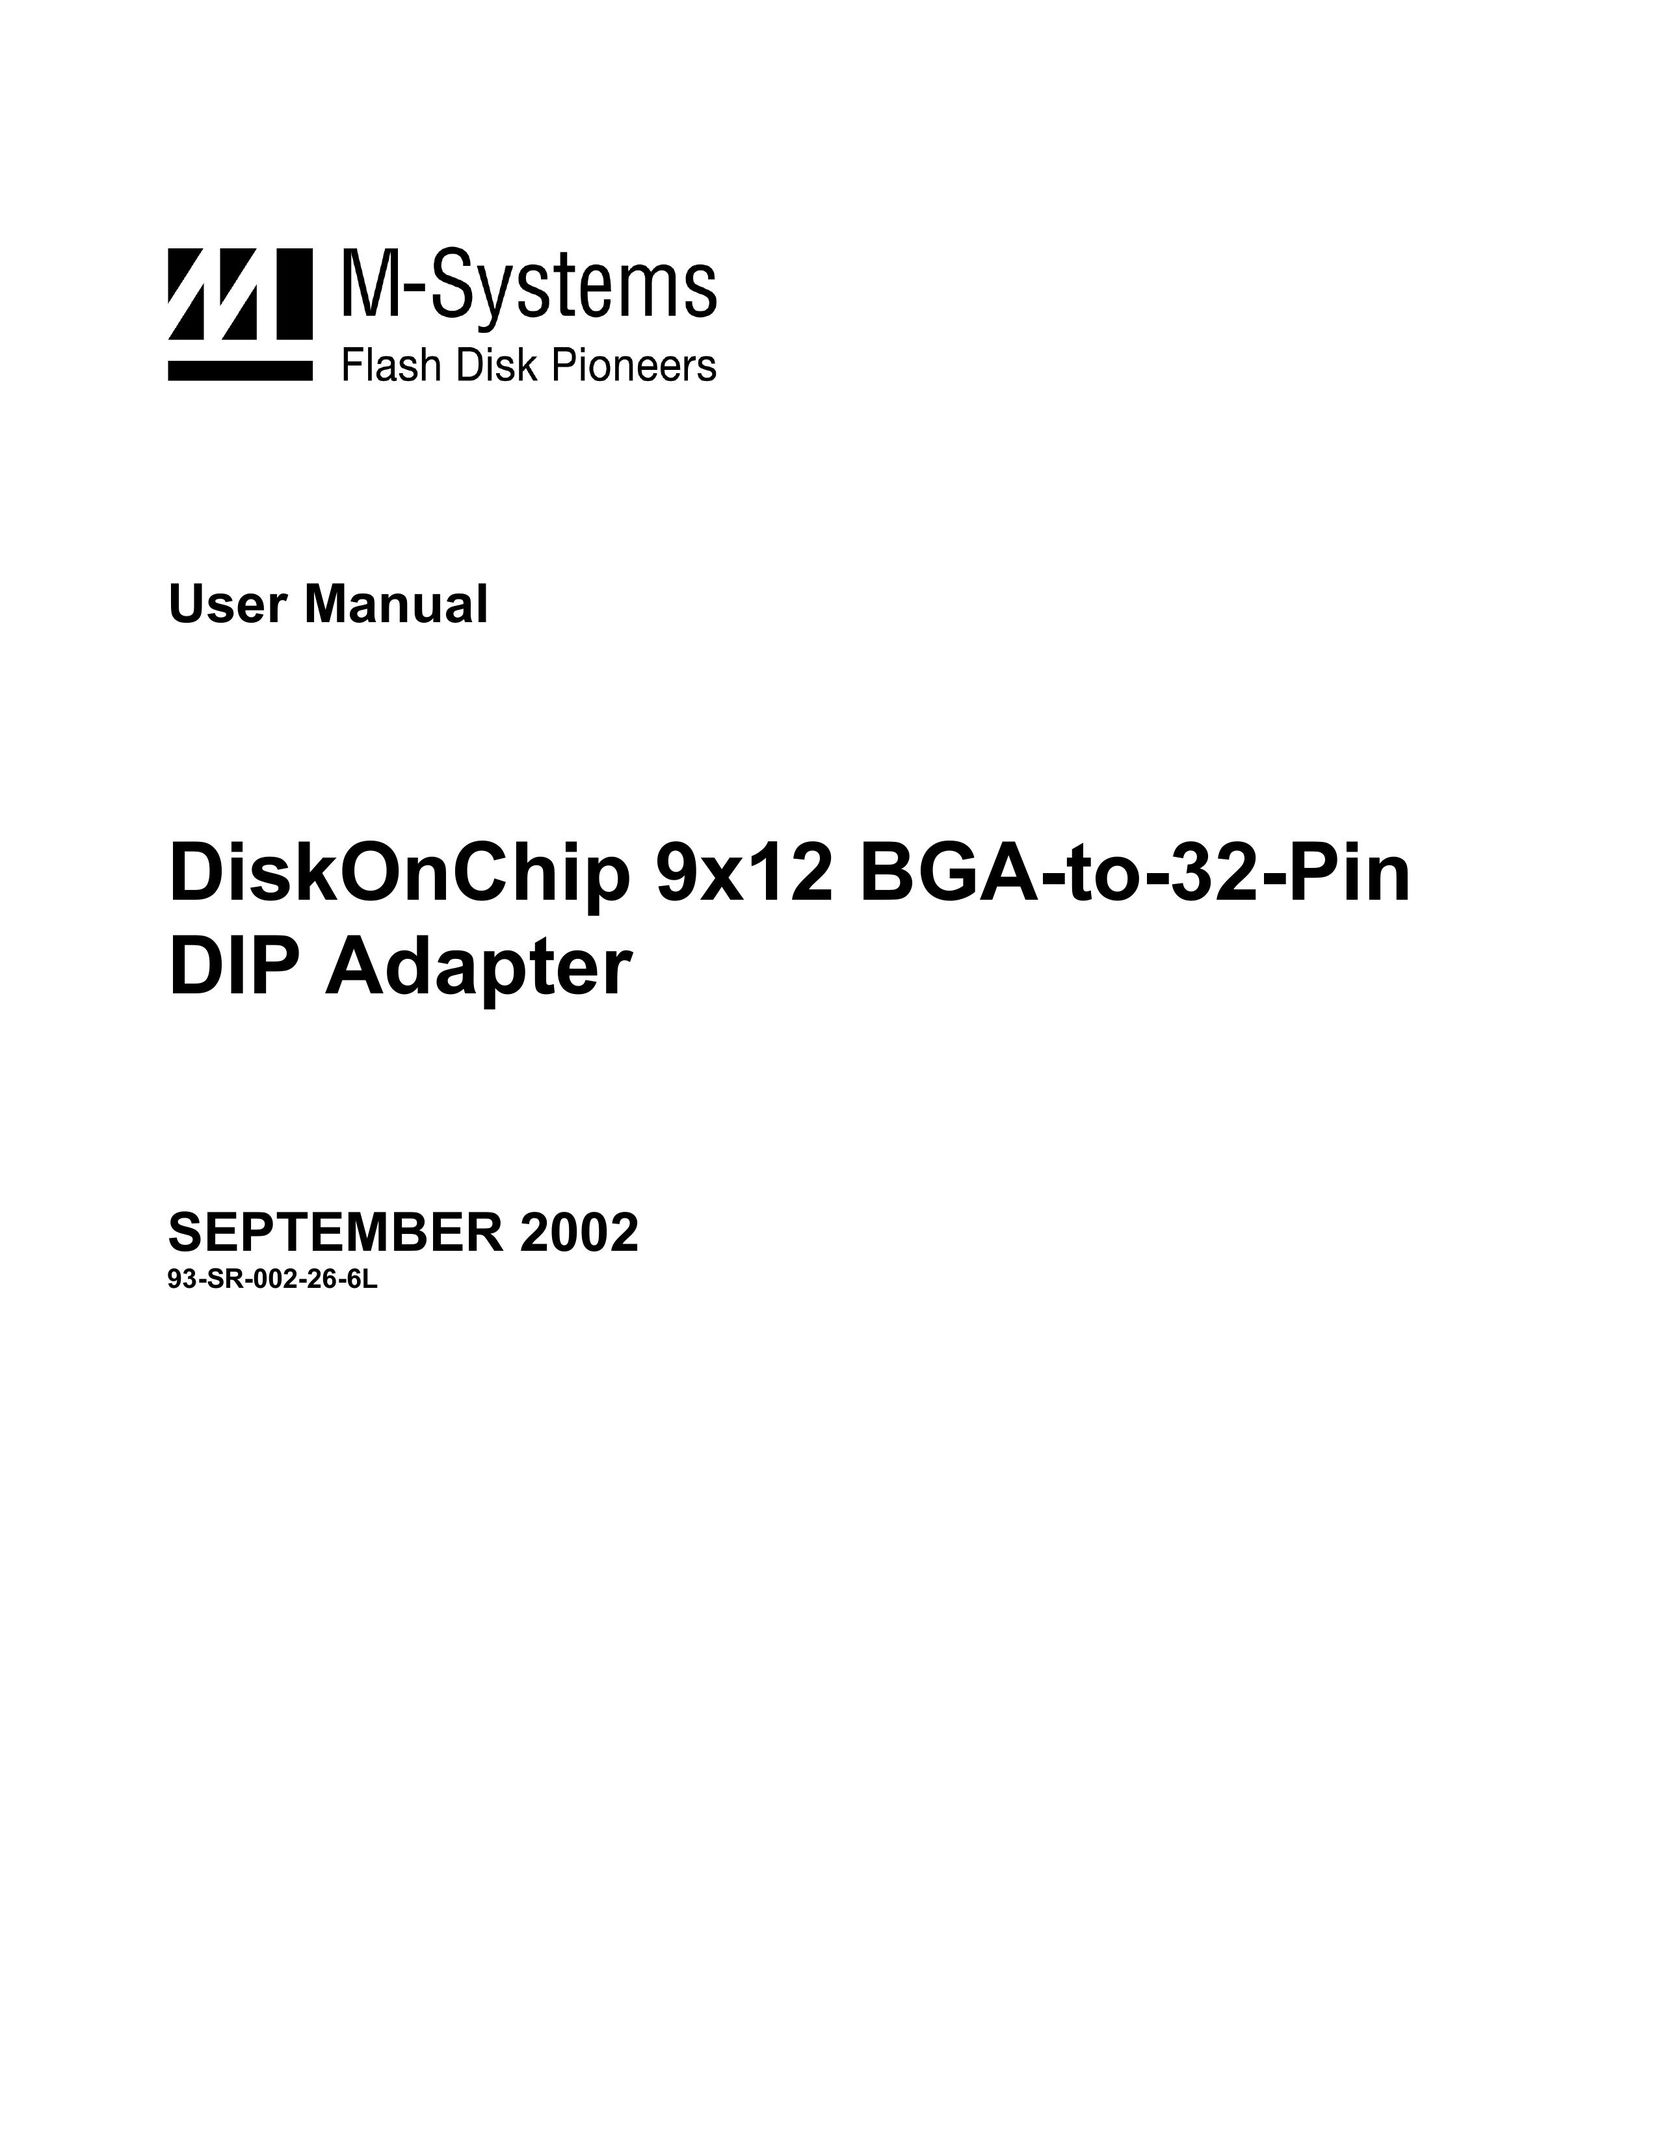 M-Systems Flash Disk Pioneers DiskOnChip 9x12 BGA-to-32-Pin DIP Adapter Network Card User Manual